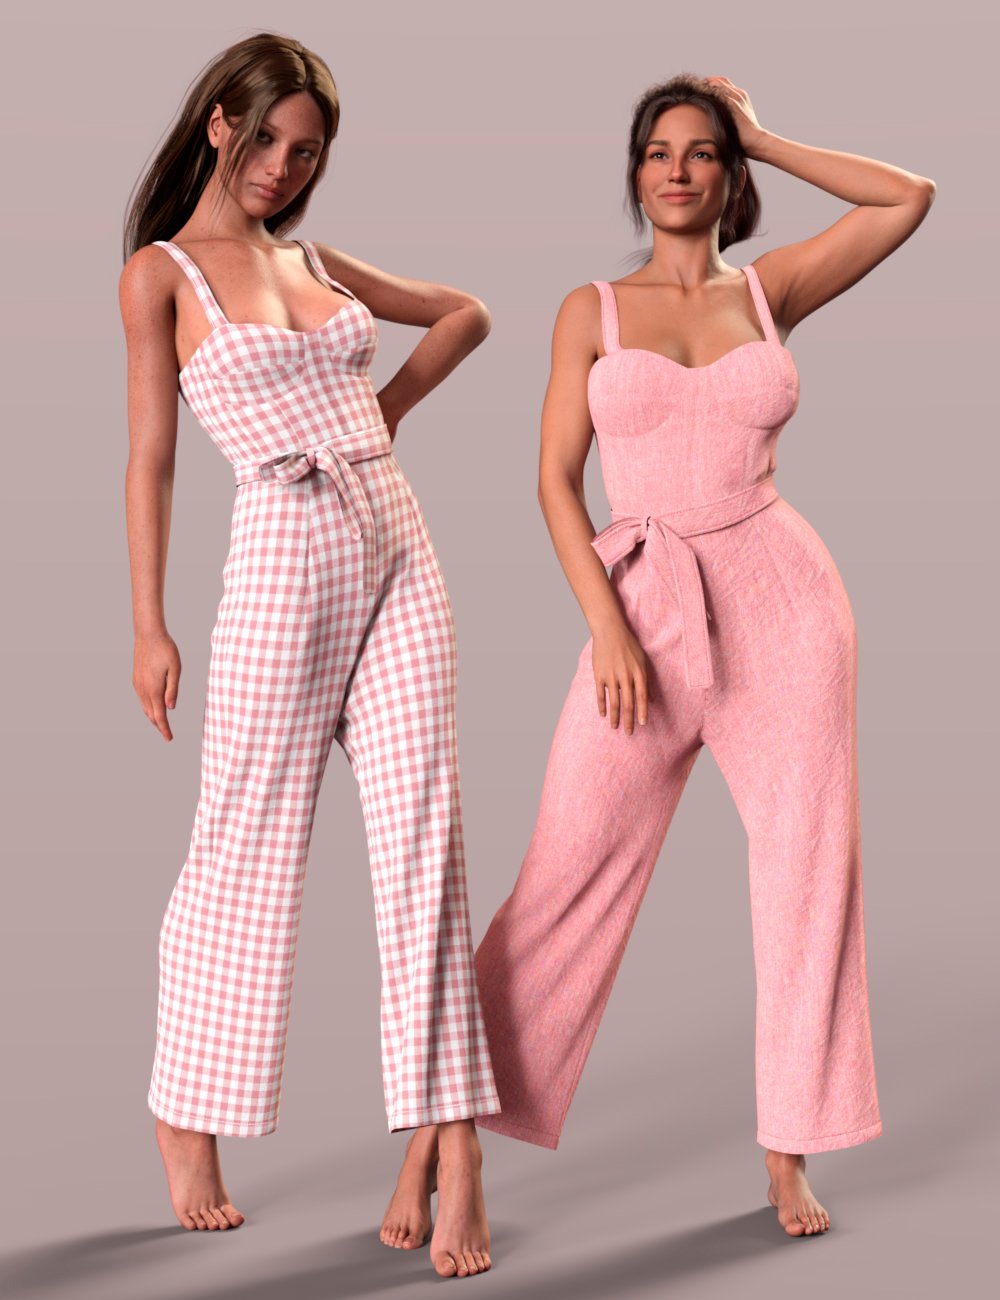 dForce Summer Jumpsuit for Genesis 9, 8, and 8.1 by: Dimidrol, 3D Models by Daz 3D